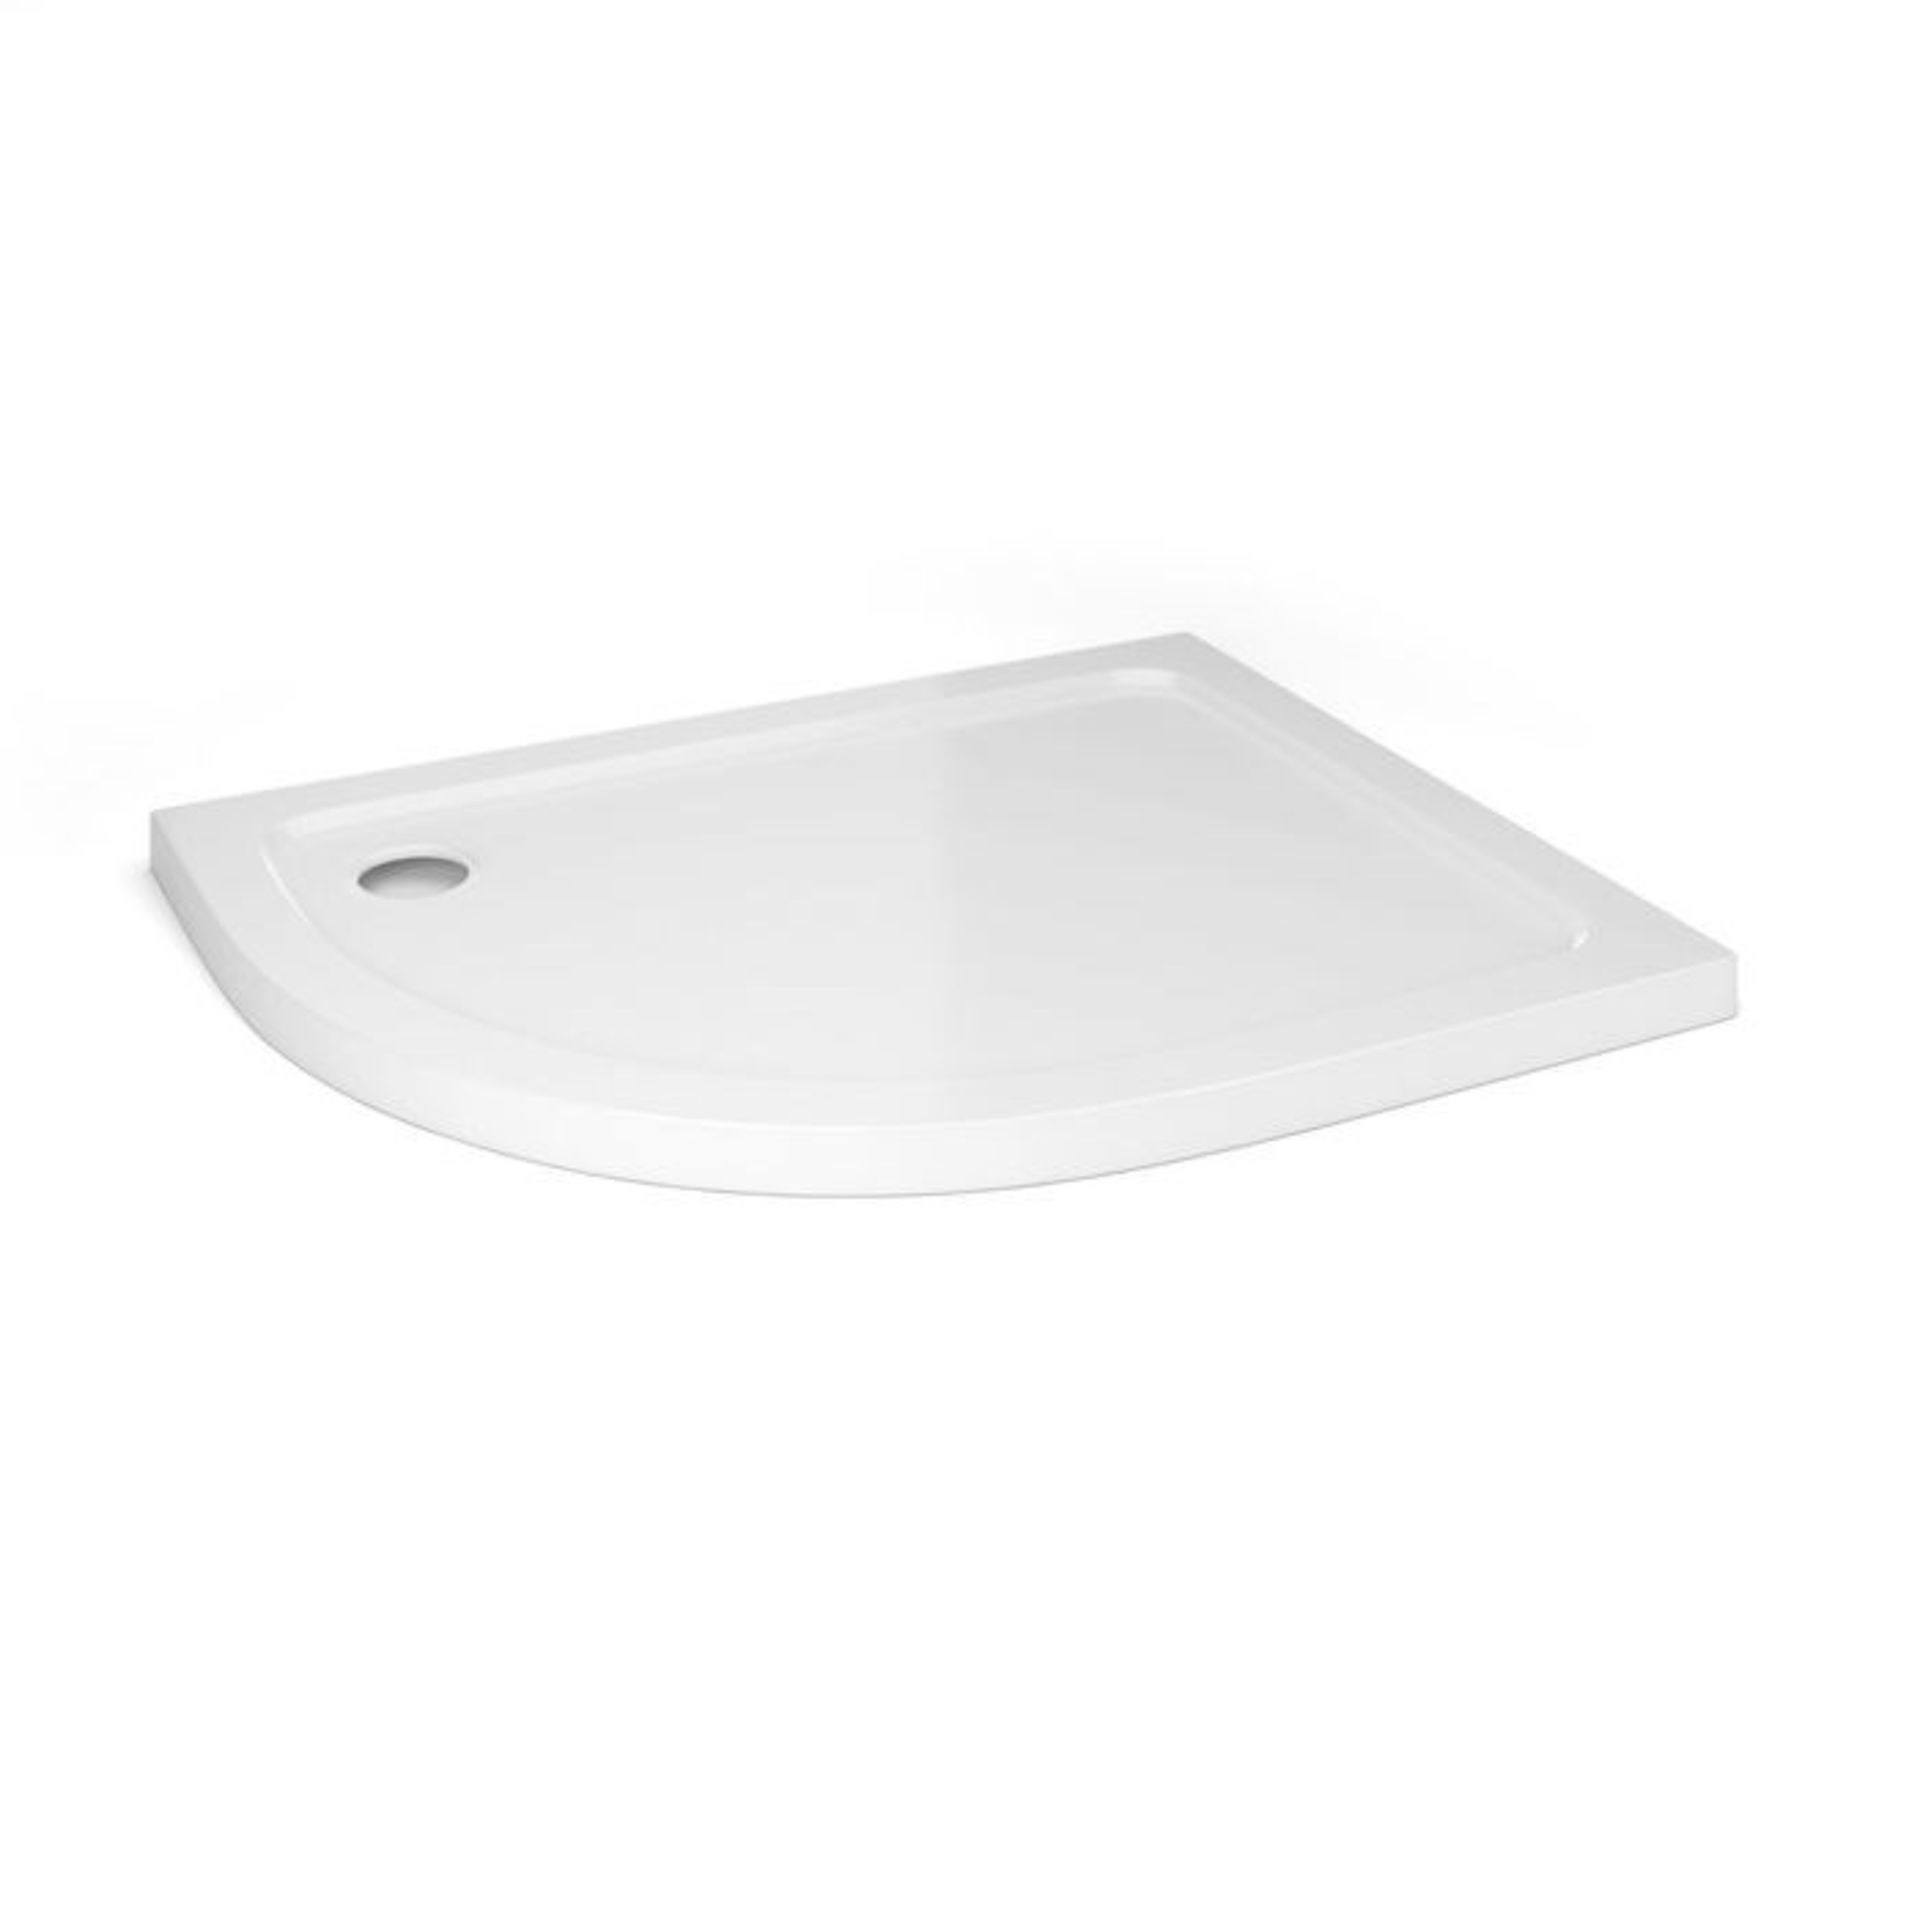 (A111) 1000x800mm Offset Quadrant Ultra Slim Stone Shower Tray - Left.Constructed from acrylic ... - Image 2 of 2